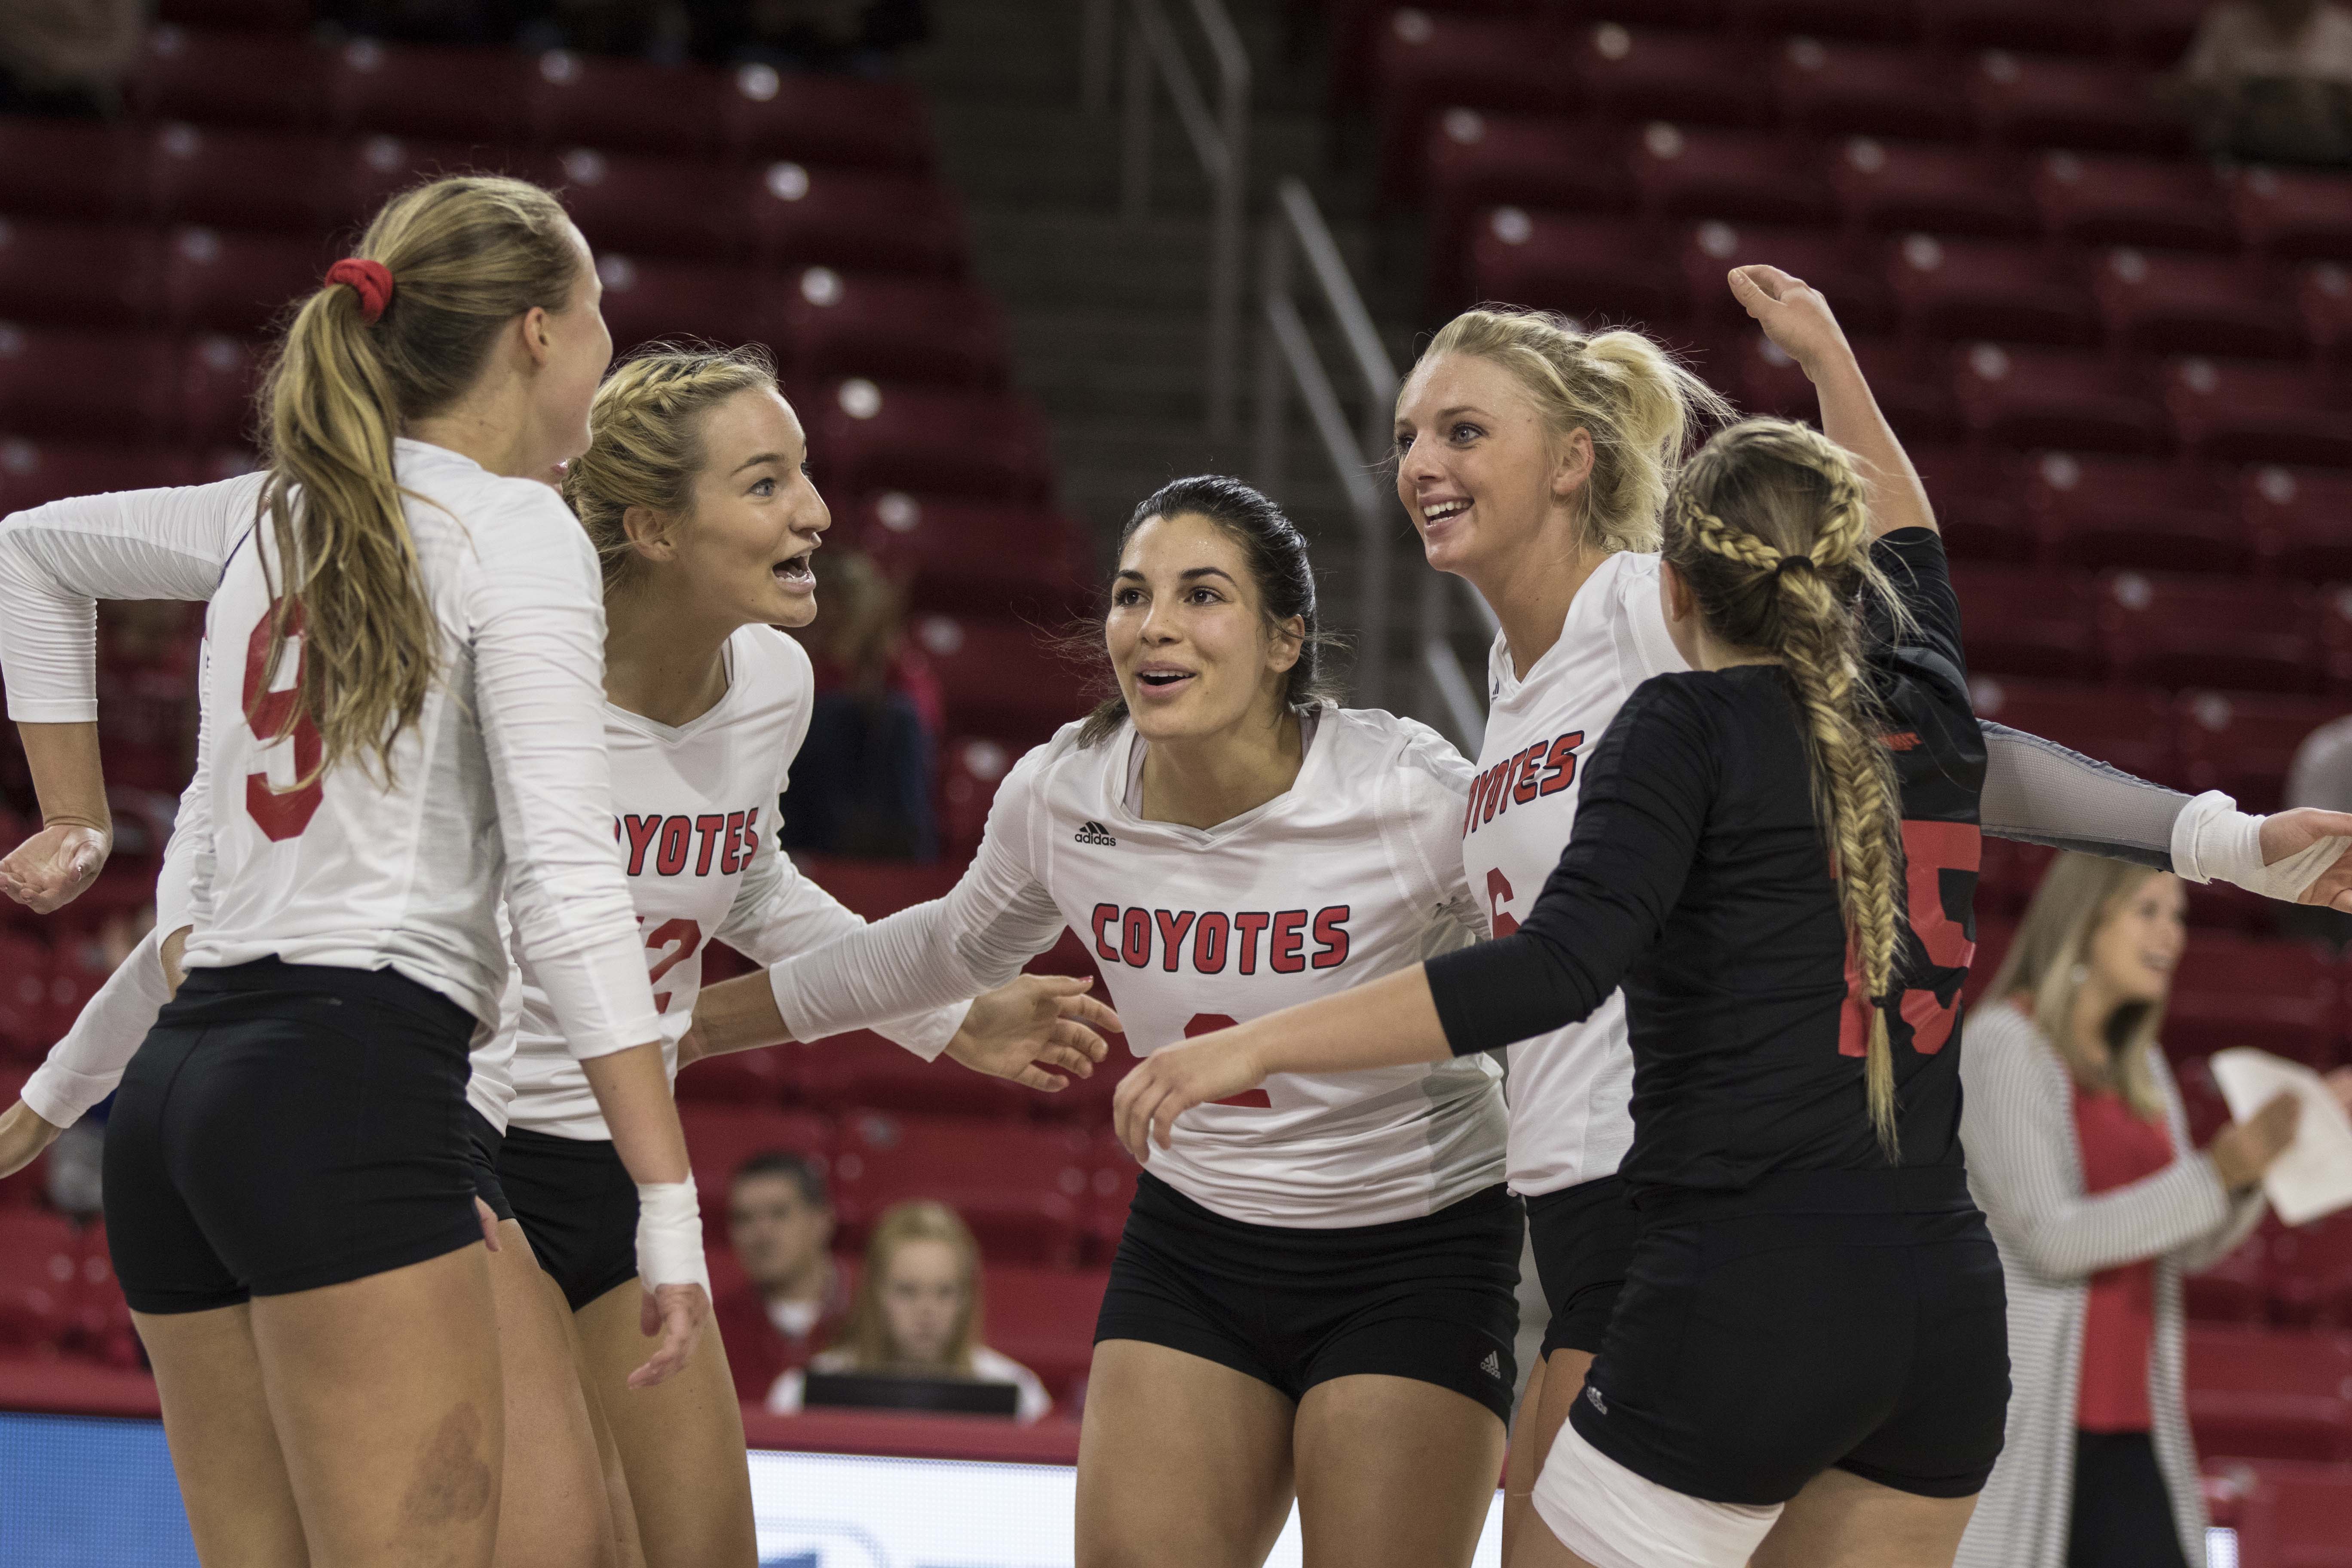 USD volleyball continues to improve, show consistency